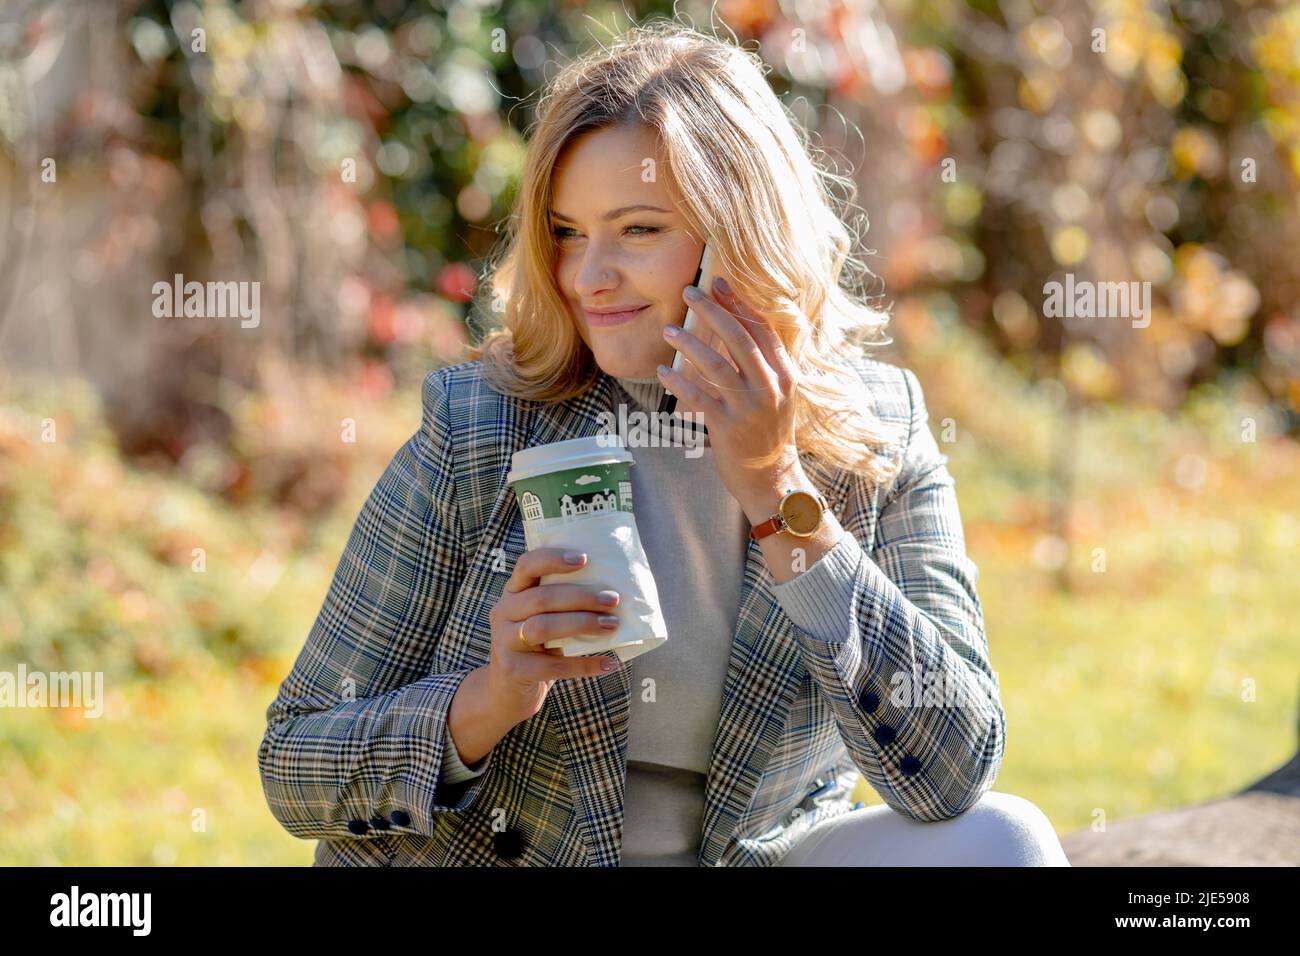 Happy young woman with long blonde hair in sweater and jacket smiles while talking on phone, sitting in city park against background of autumn trees Stock Photo